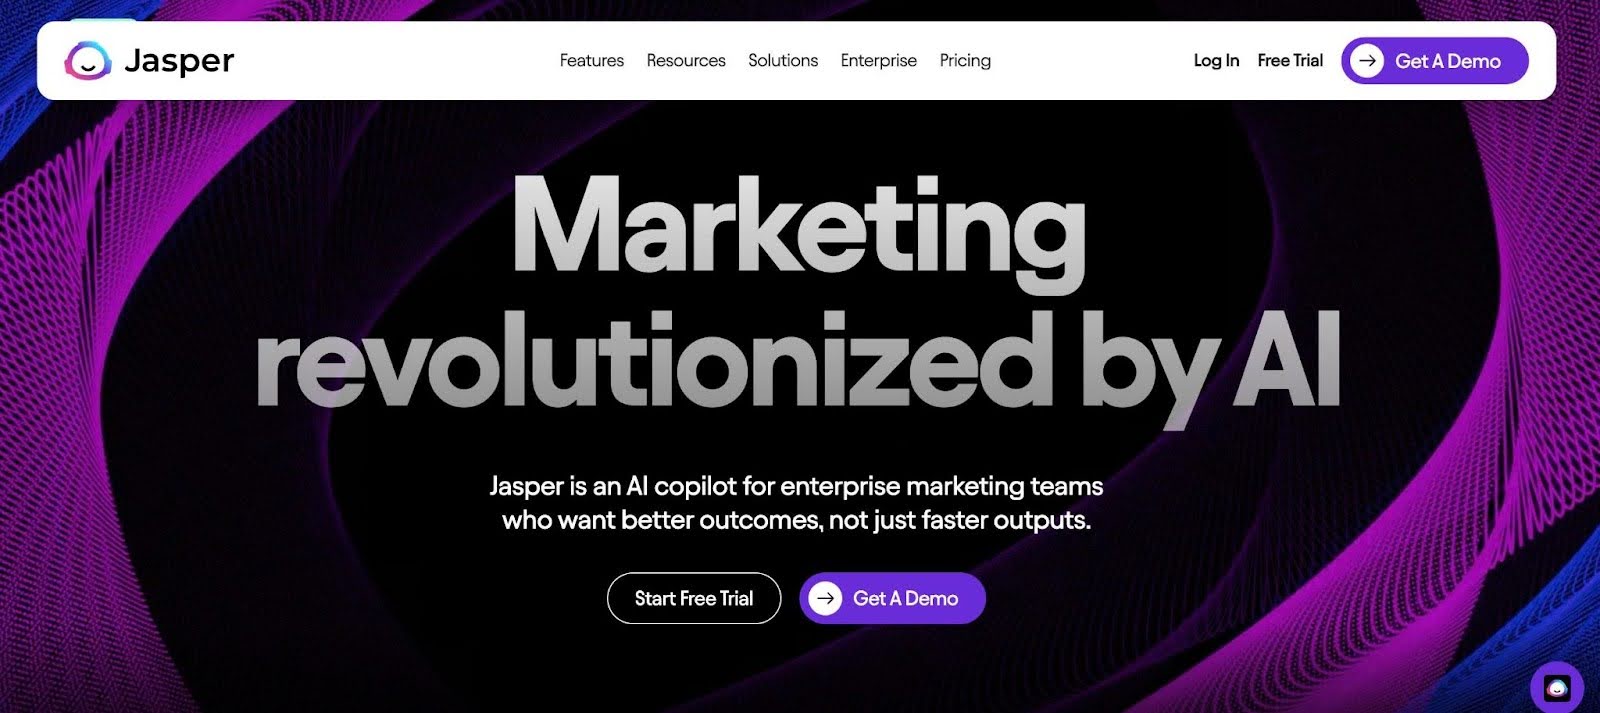 Jasper Home Page Text: Marketing Revolutionized by AI with CTA to get a demo or start a free trial.